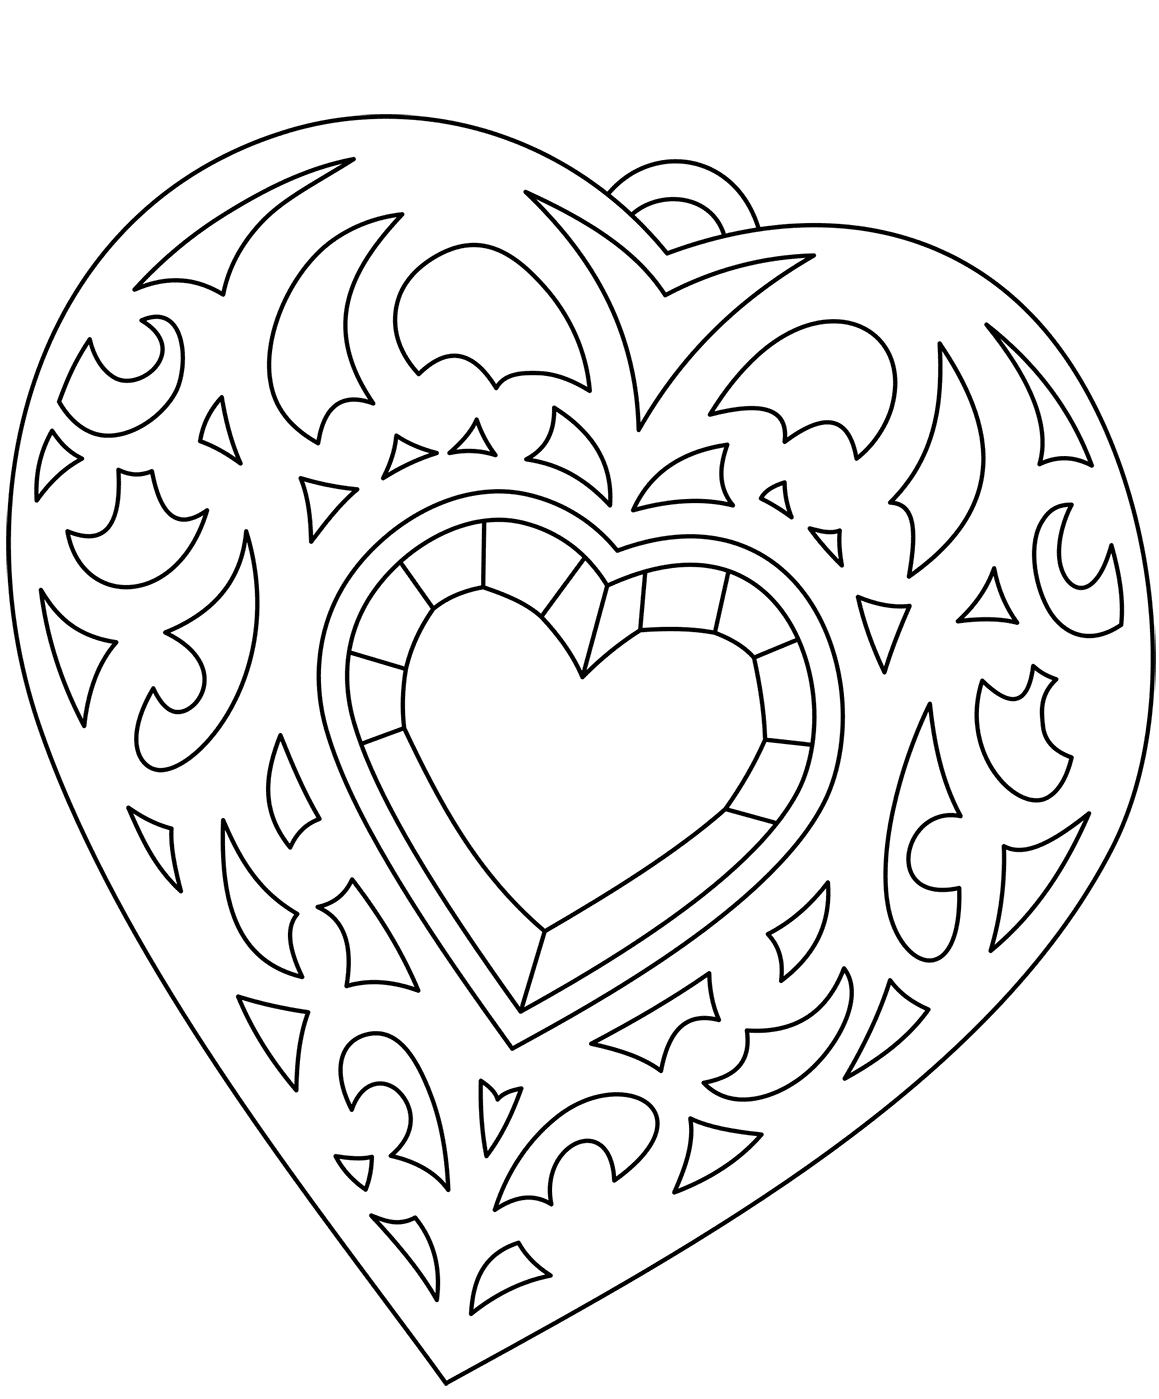 Heart Shaped Medallion Coloring Page